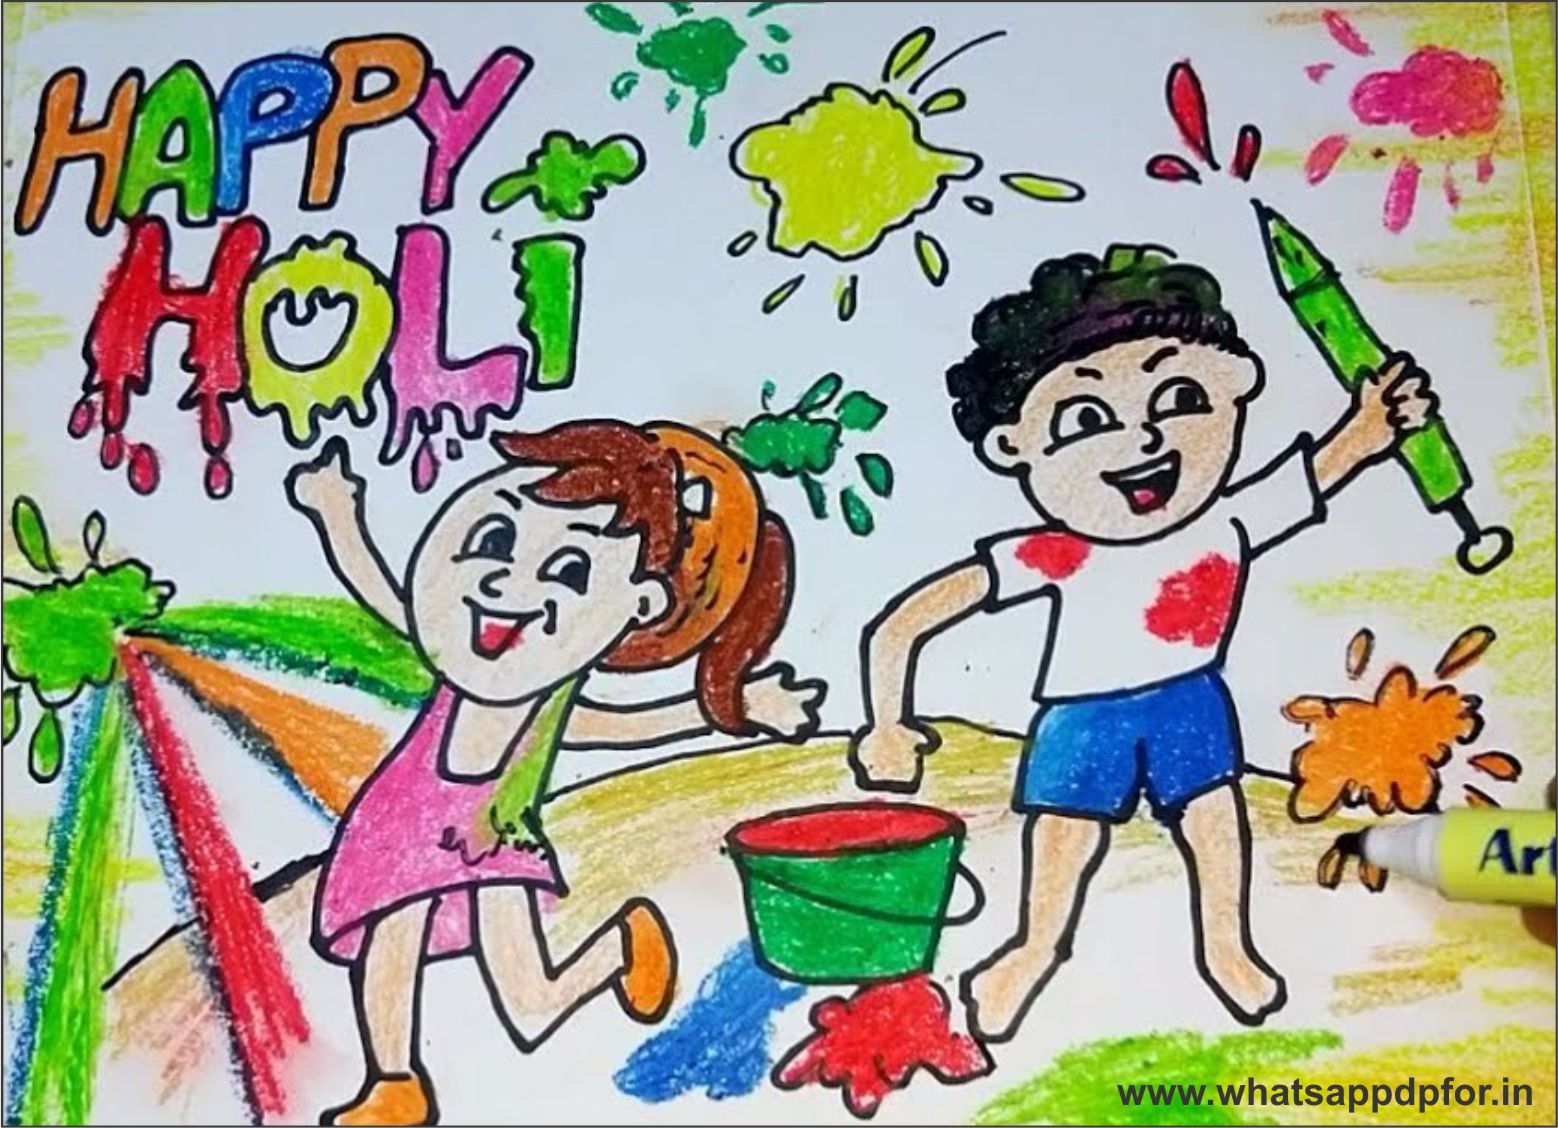 What is the significance of celebrating Holi? - Quora